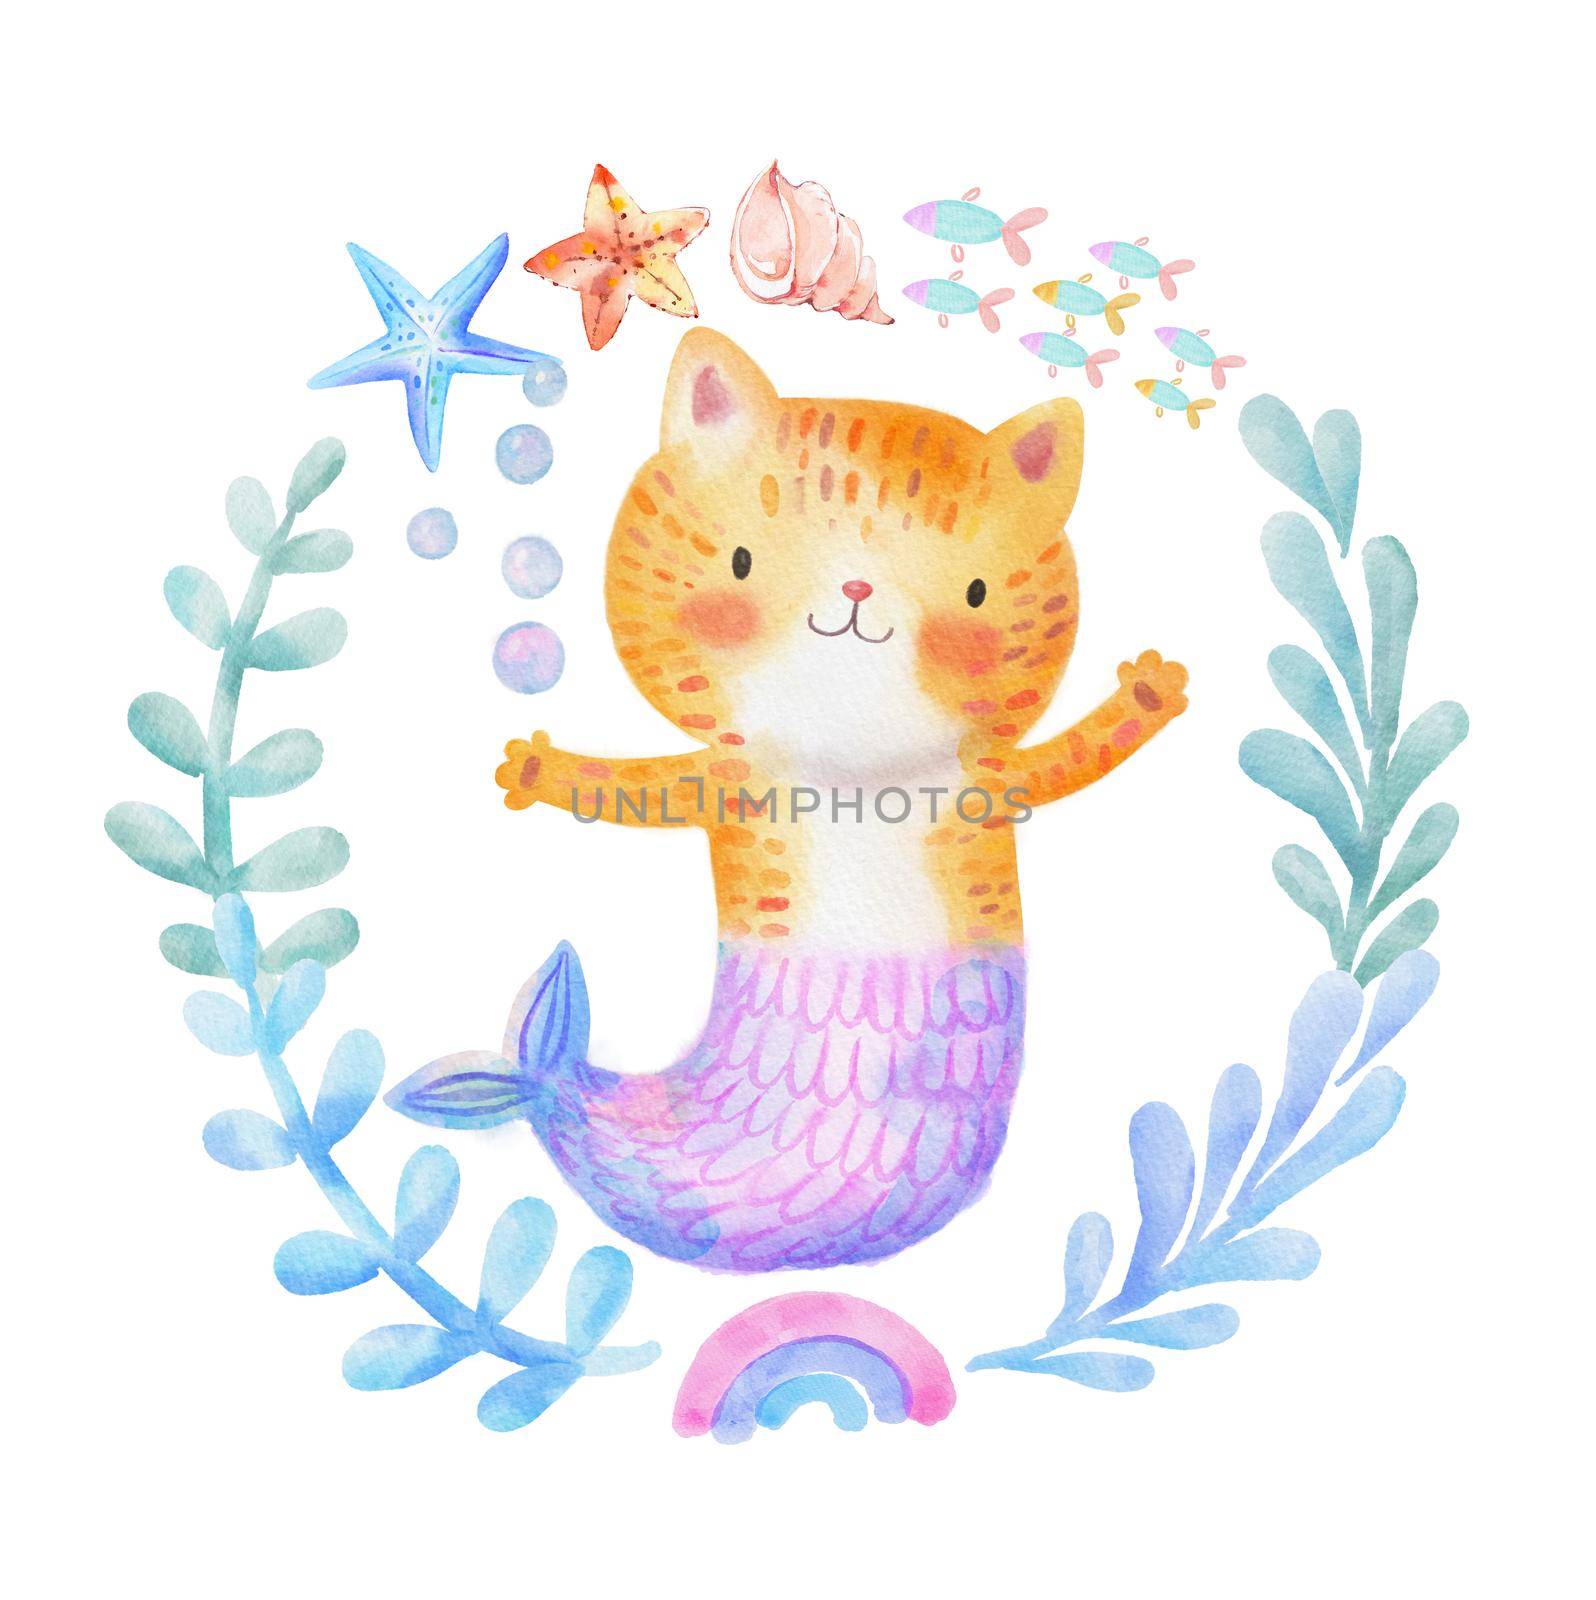 Cute Watercolor Meow-maid Purr-maid Cat Mermaid. Little Kitty Mermaid in a Kiddish Style.